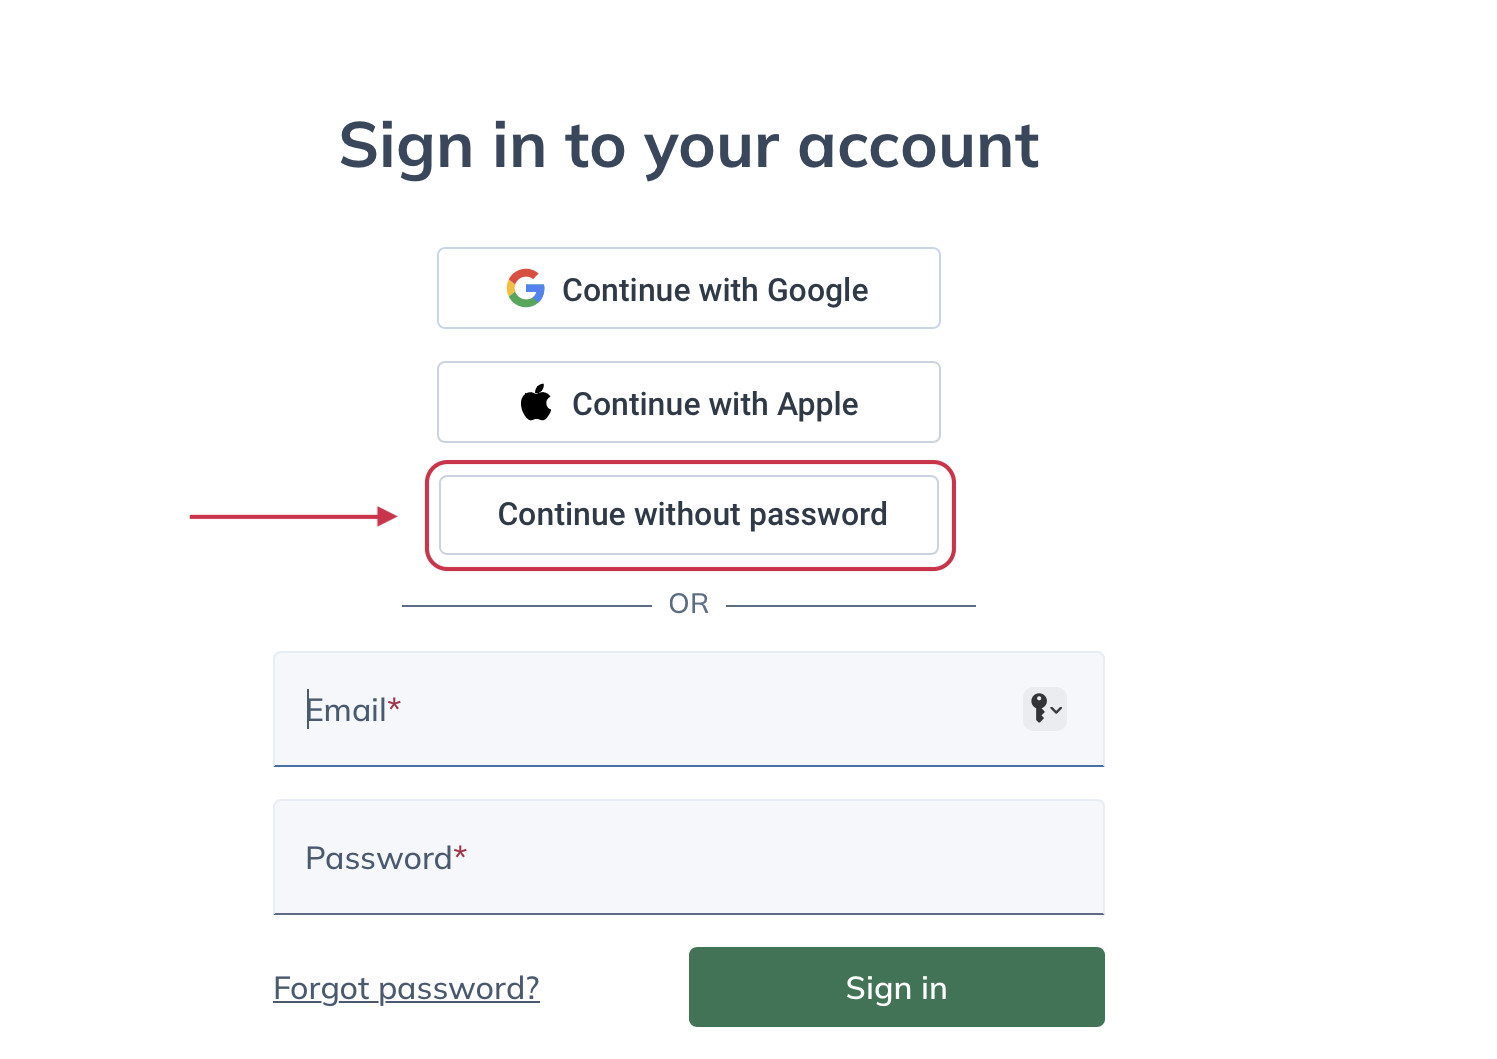 Selecting continue without password to request an instant link